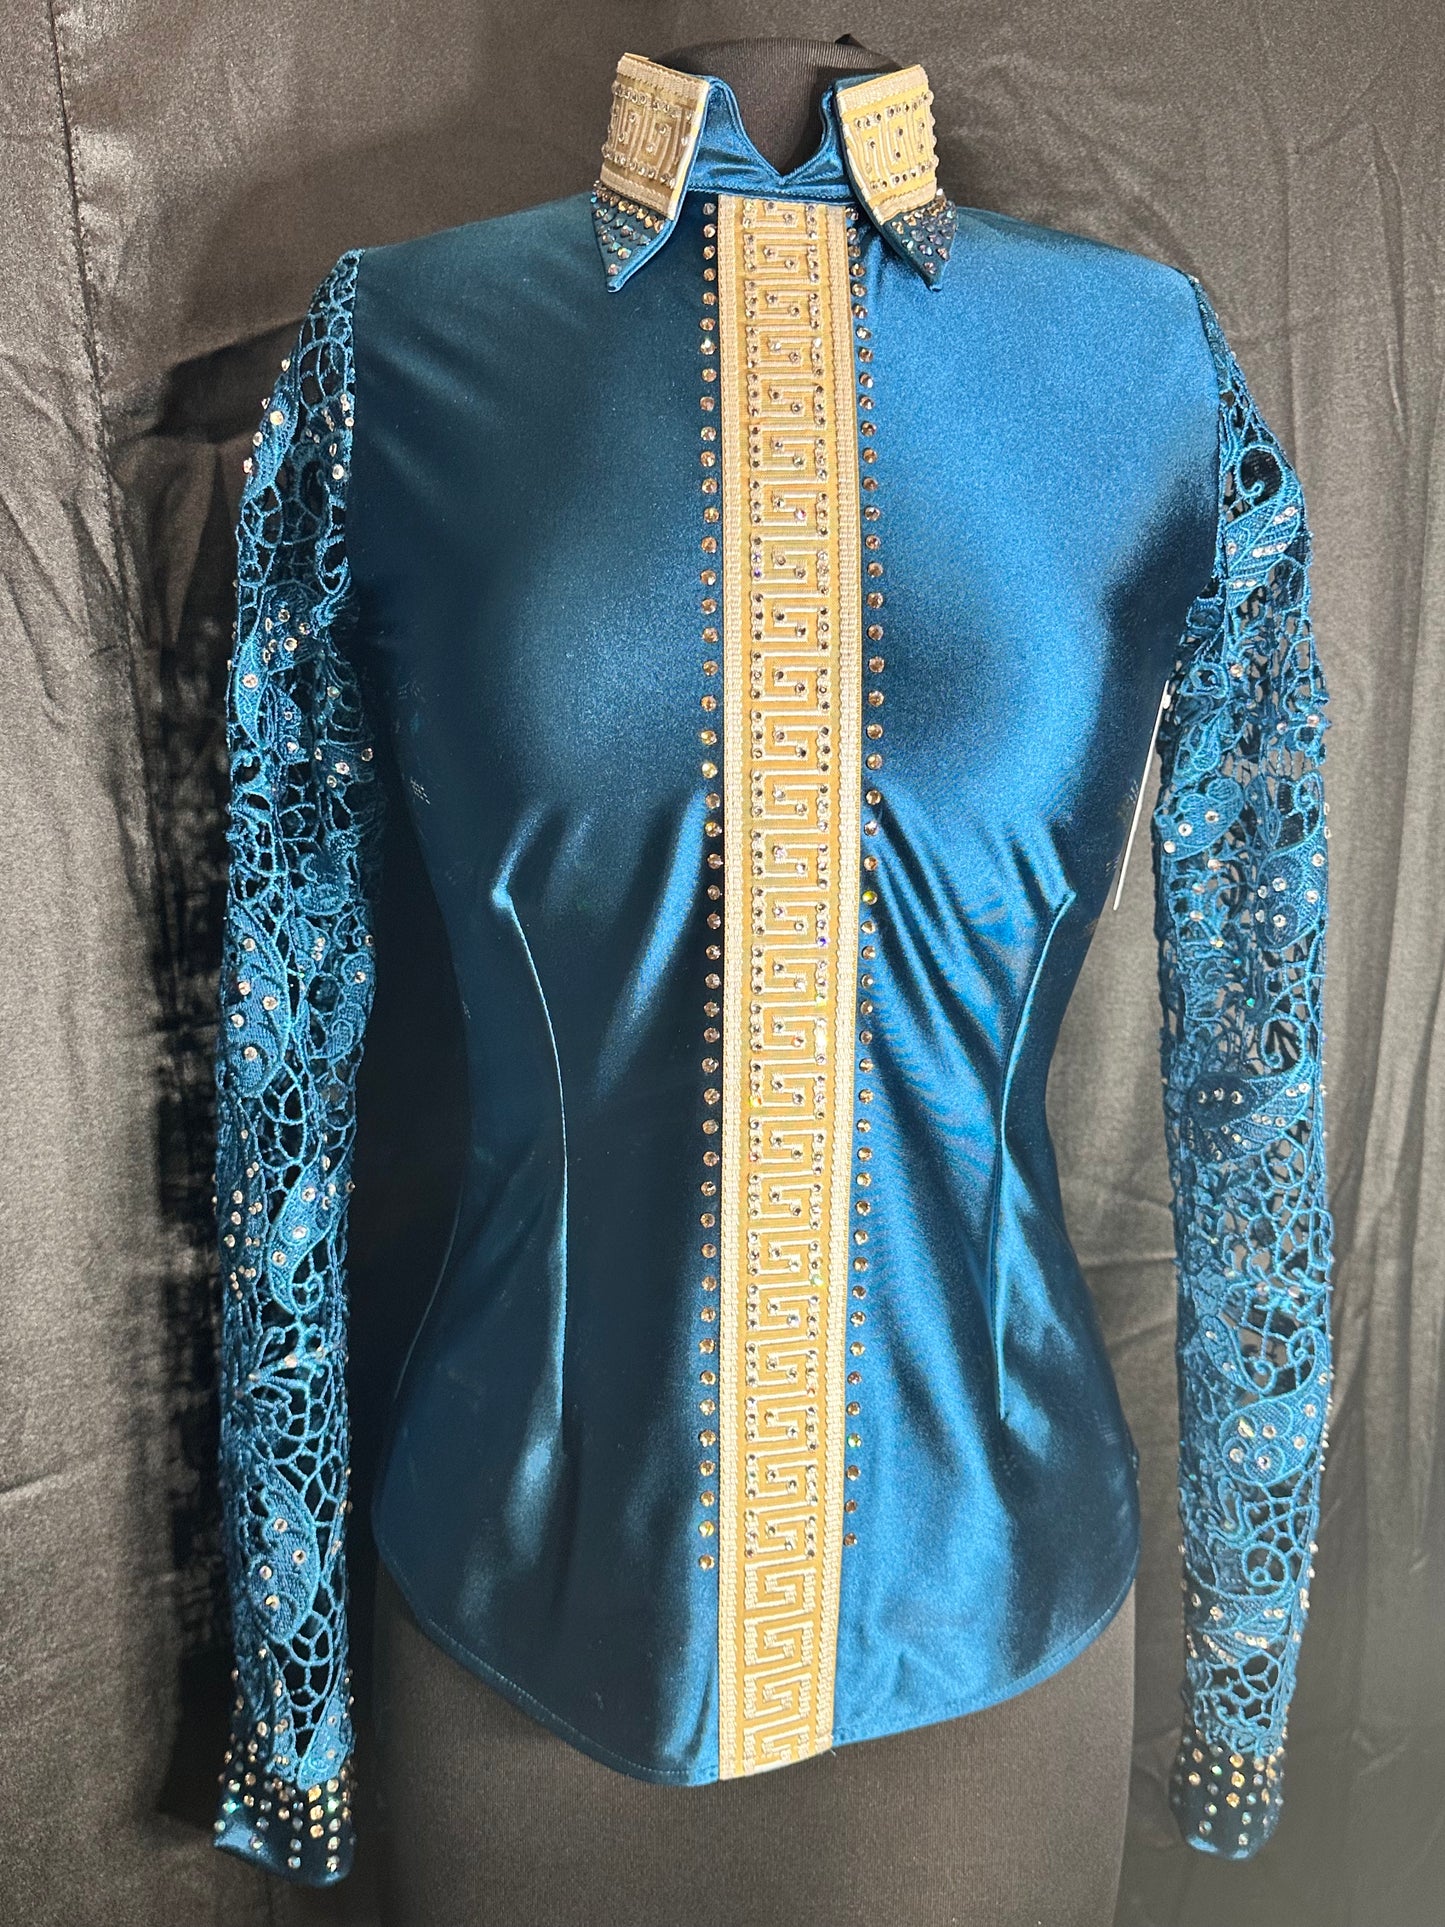 Size small teal back zip day shirt with lace sleeves